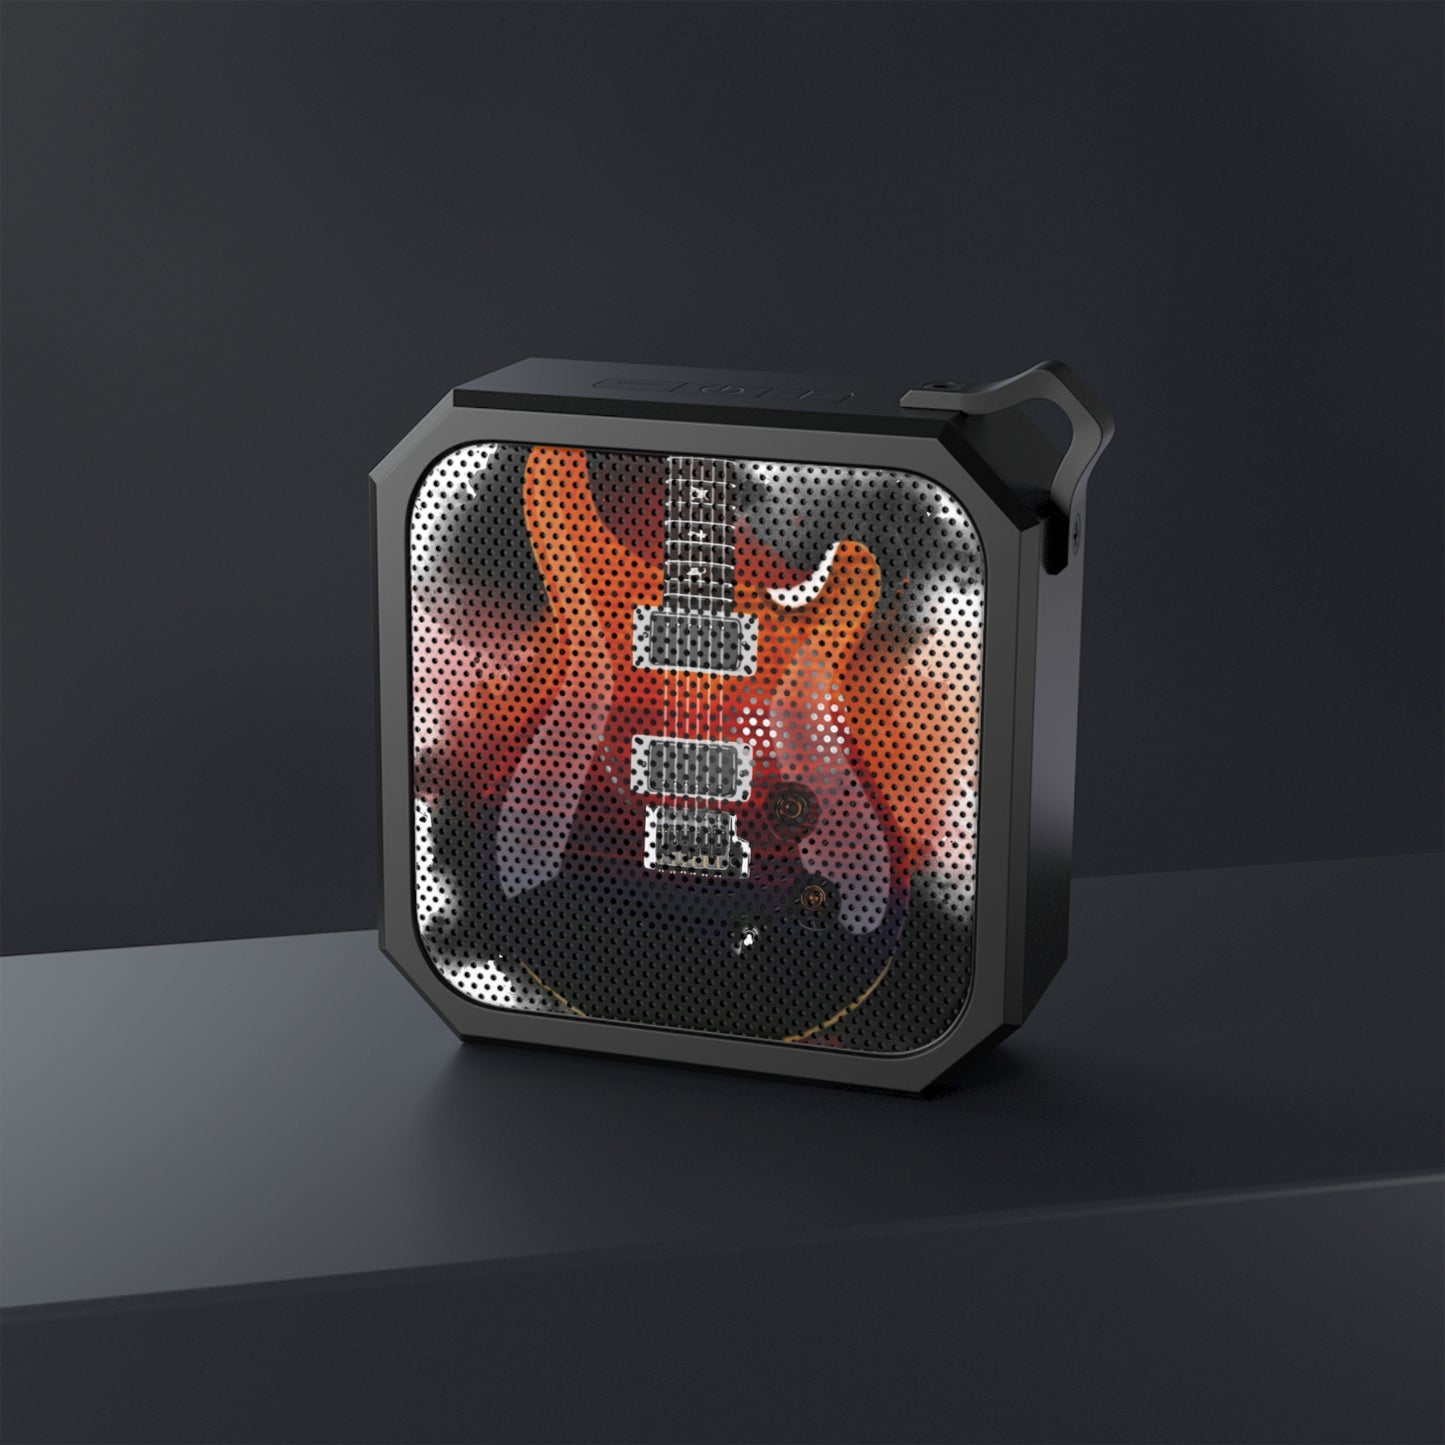 digital painting of a blue-orange-red electric guitar printed on a bluetooth speaker